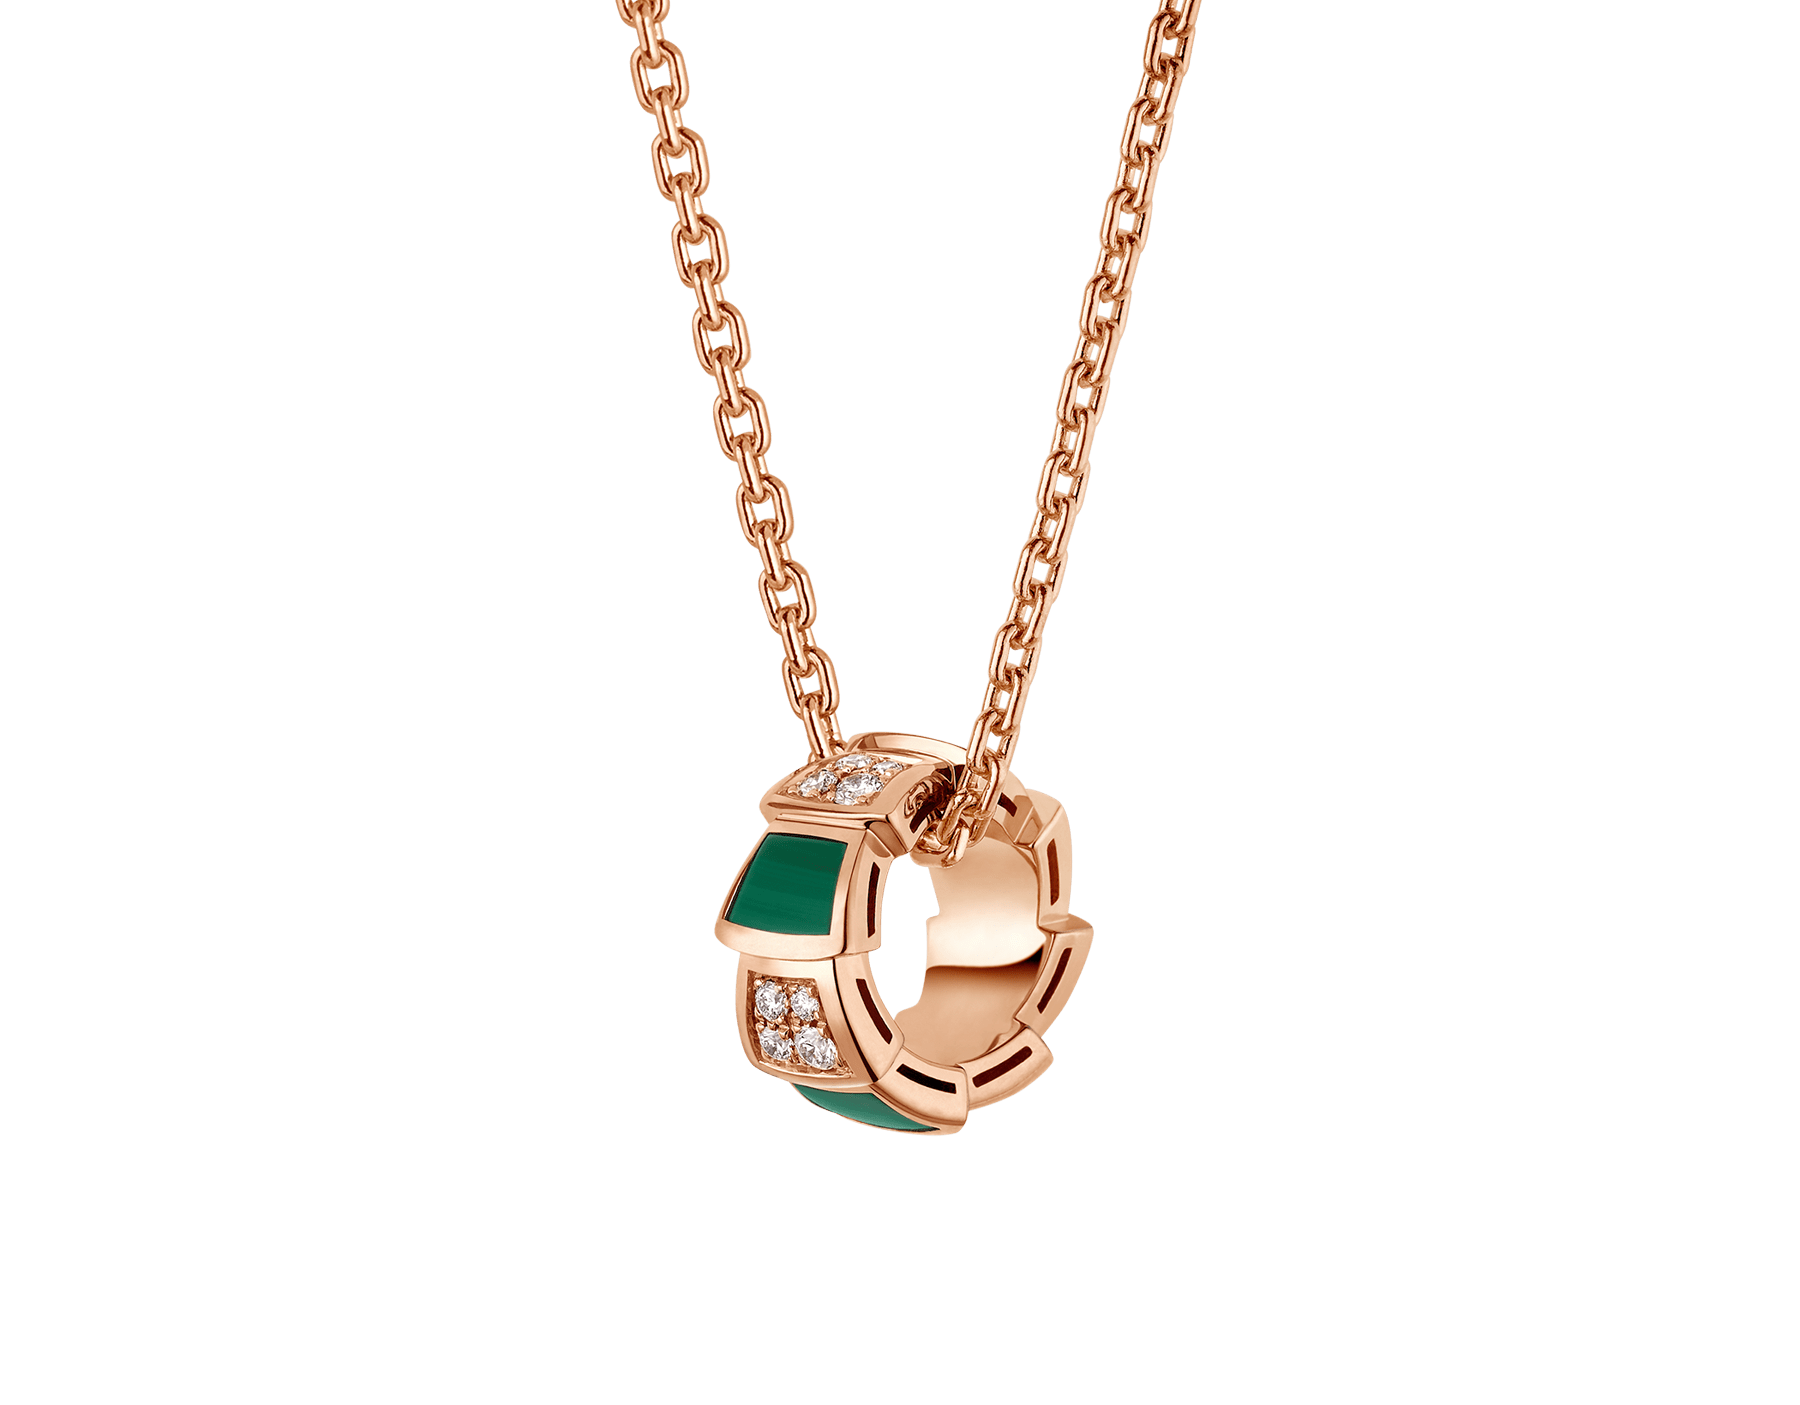 Wholesale OEM design jewelry 18 kt rose gold OEM/ODM Jewelry necklace set with malachite elements and pavé diamonds on the pendant.